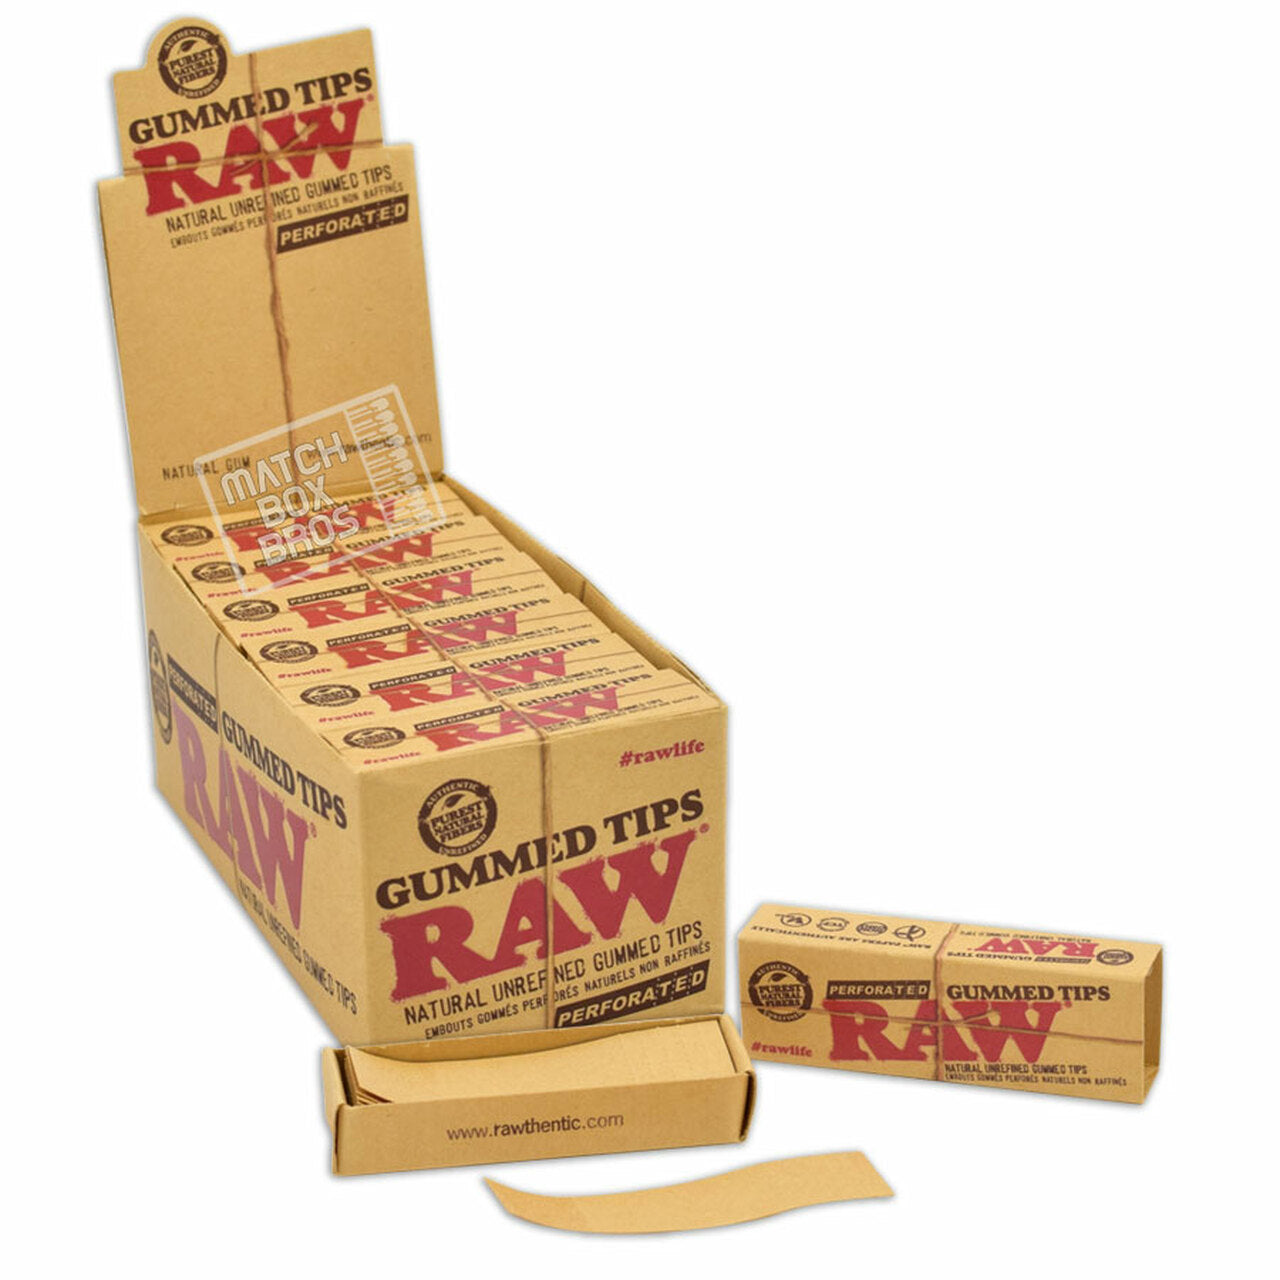 RAW GUMMED TIPS PERFORATED 24CT